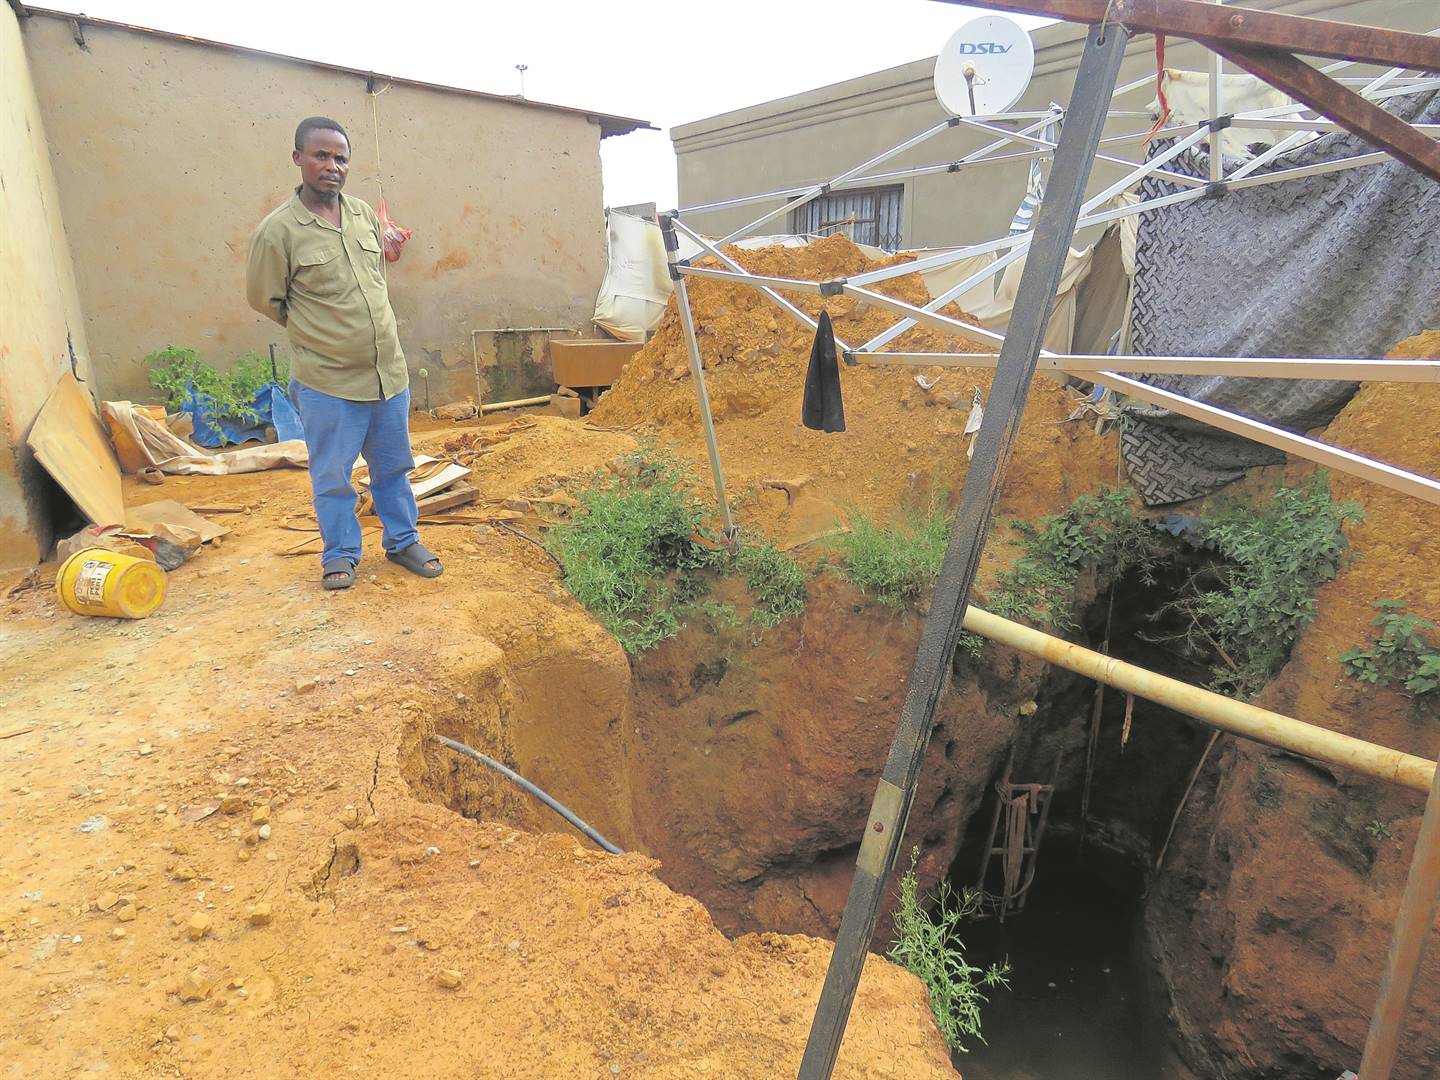 This huge hole that Mthetho Makhathini has dug up in his yard is a big headache for neighbours.   Photo by             Ntebatse Masipa